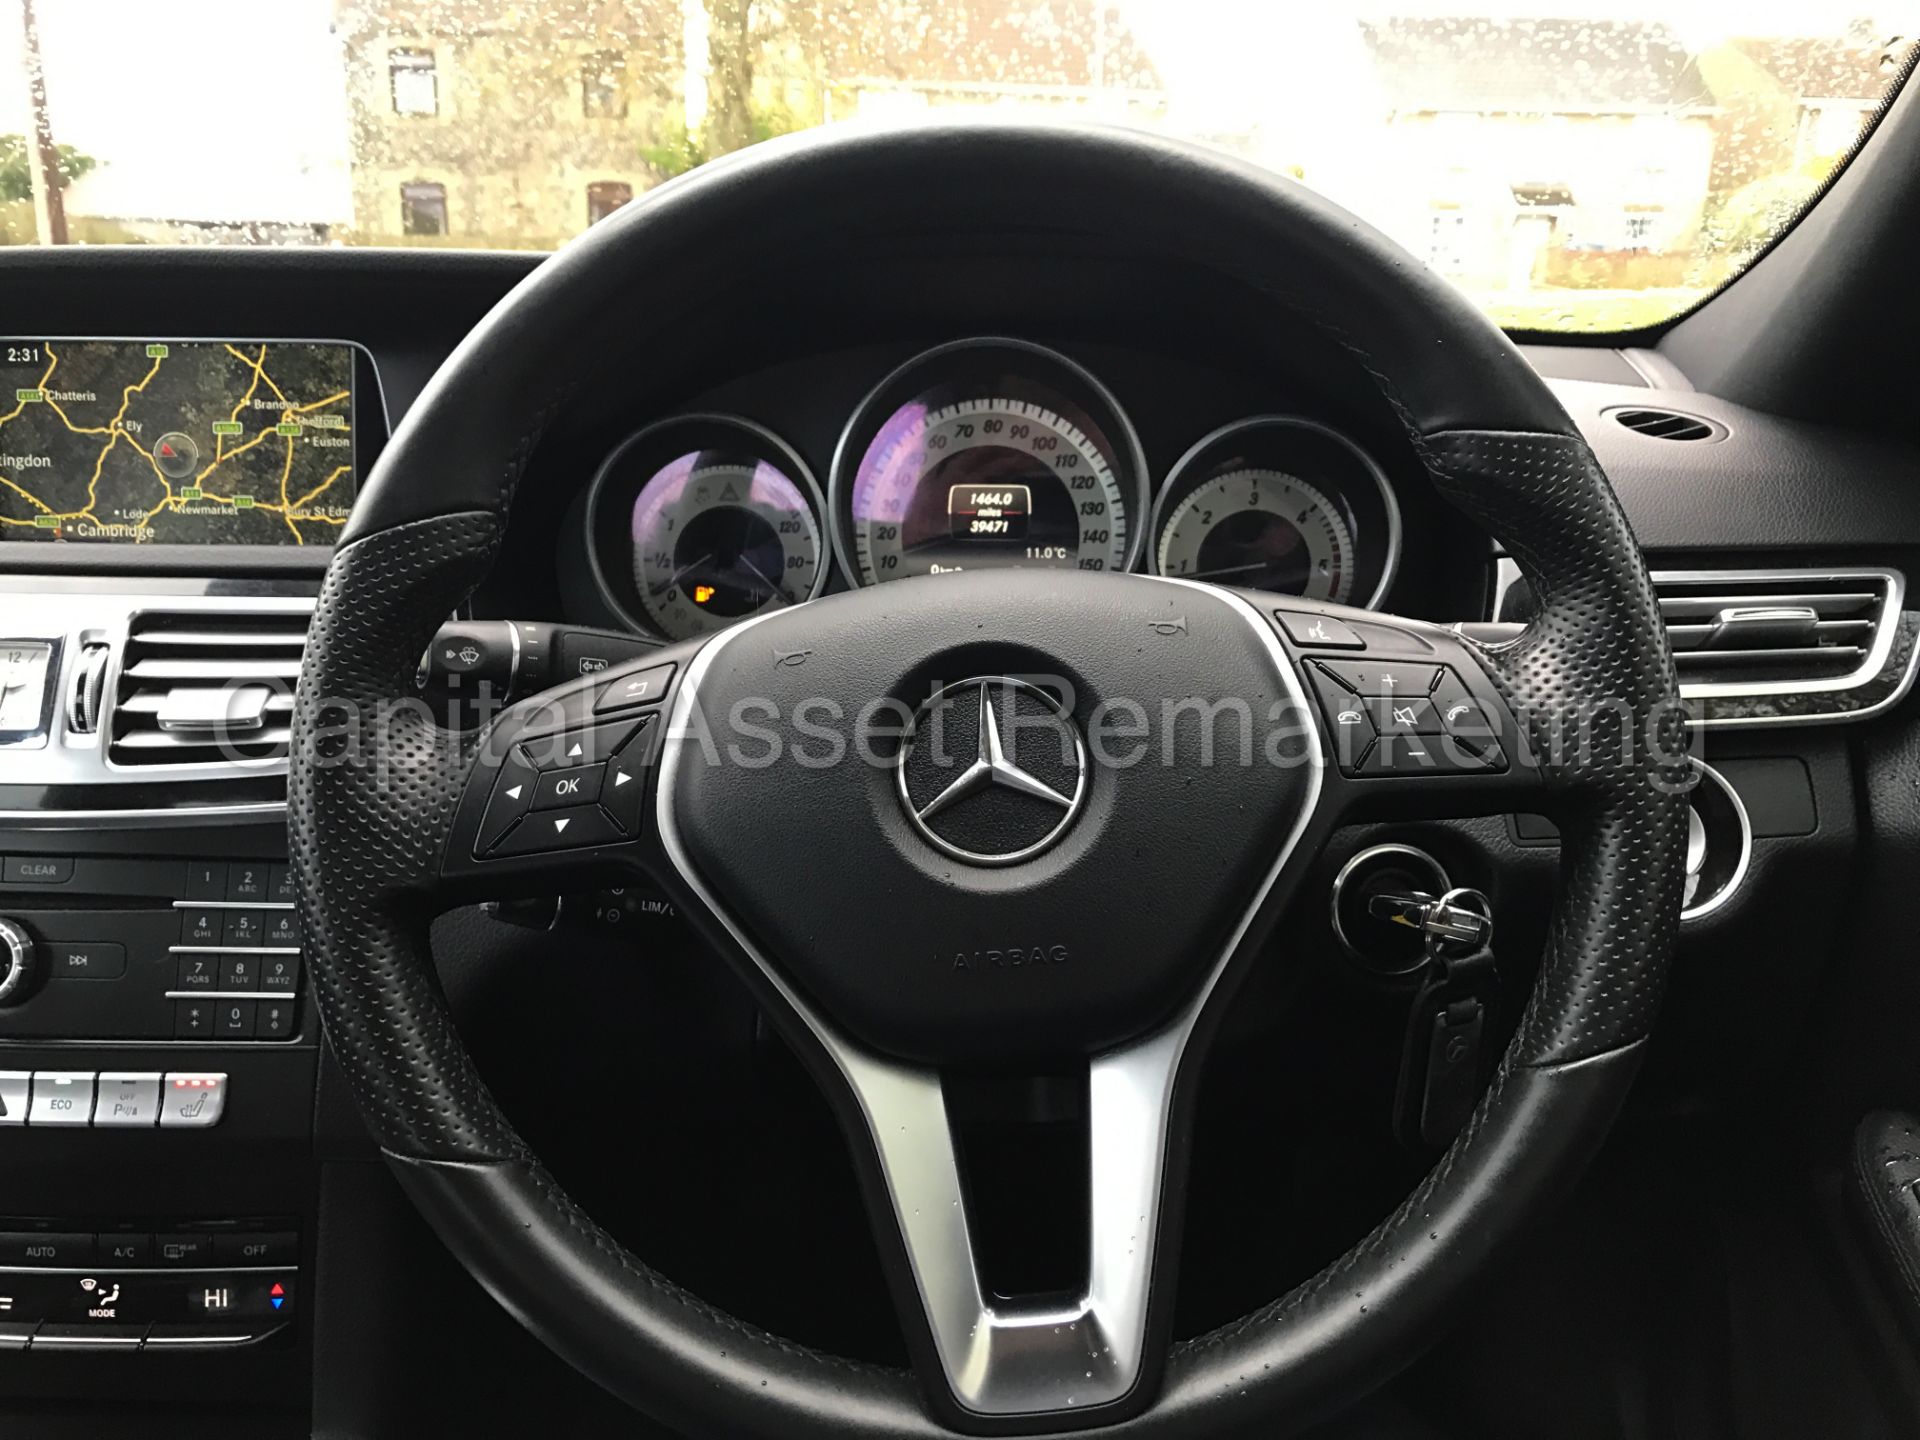 ON SALE MERCEDES-BENZ E220 CDI (2016 MODEL) 'SALOON - 7-G AUTO TIP-TRONIC - SAT NAV - LEATHER' * - Image 25 of 26